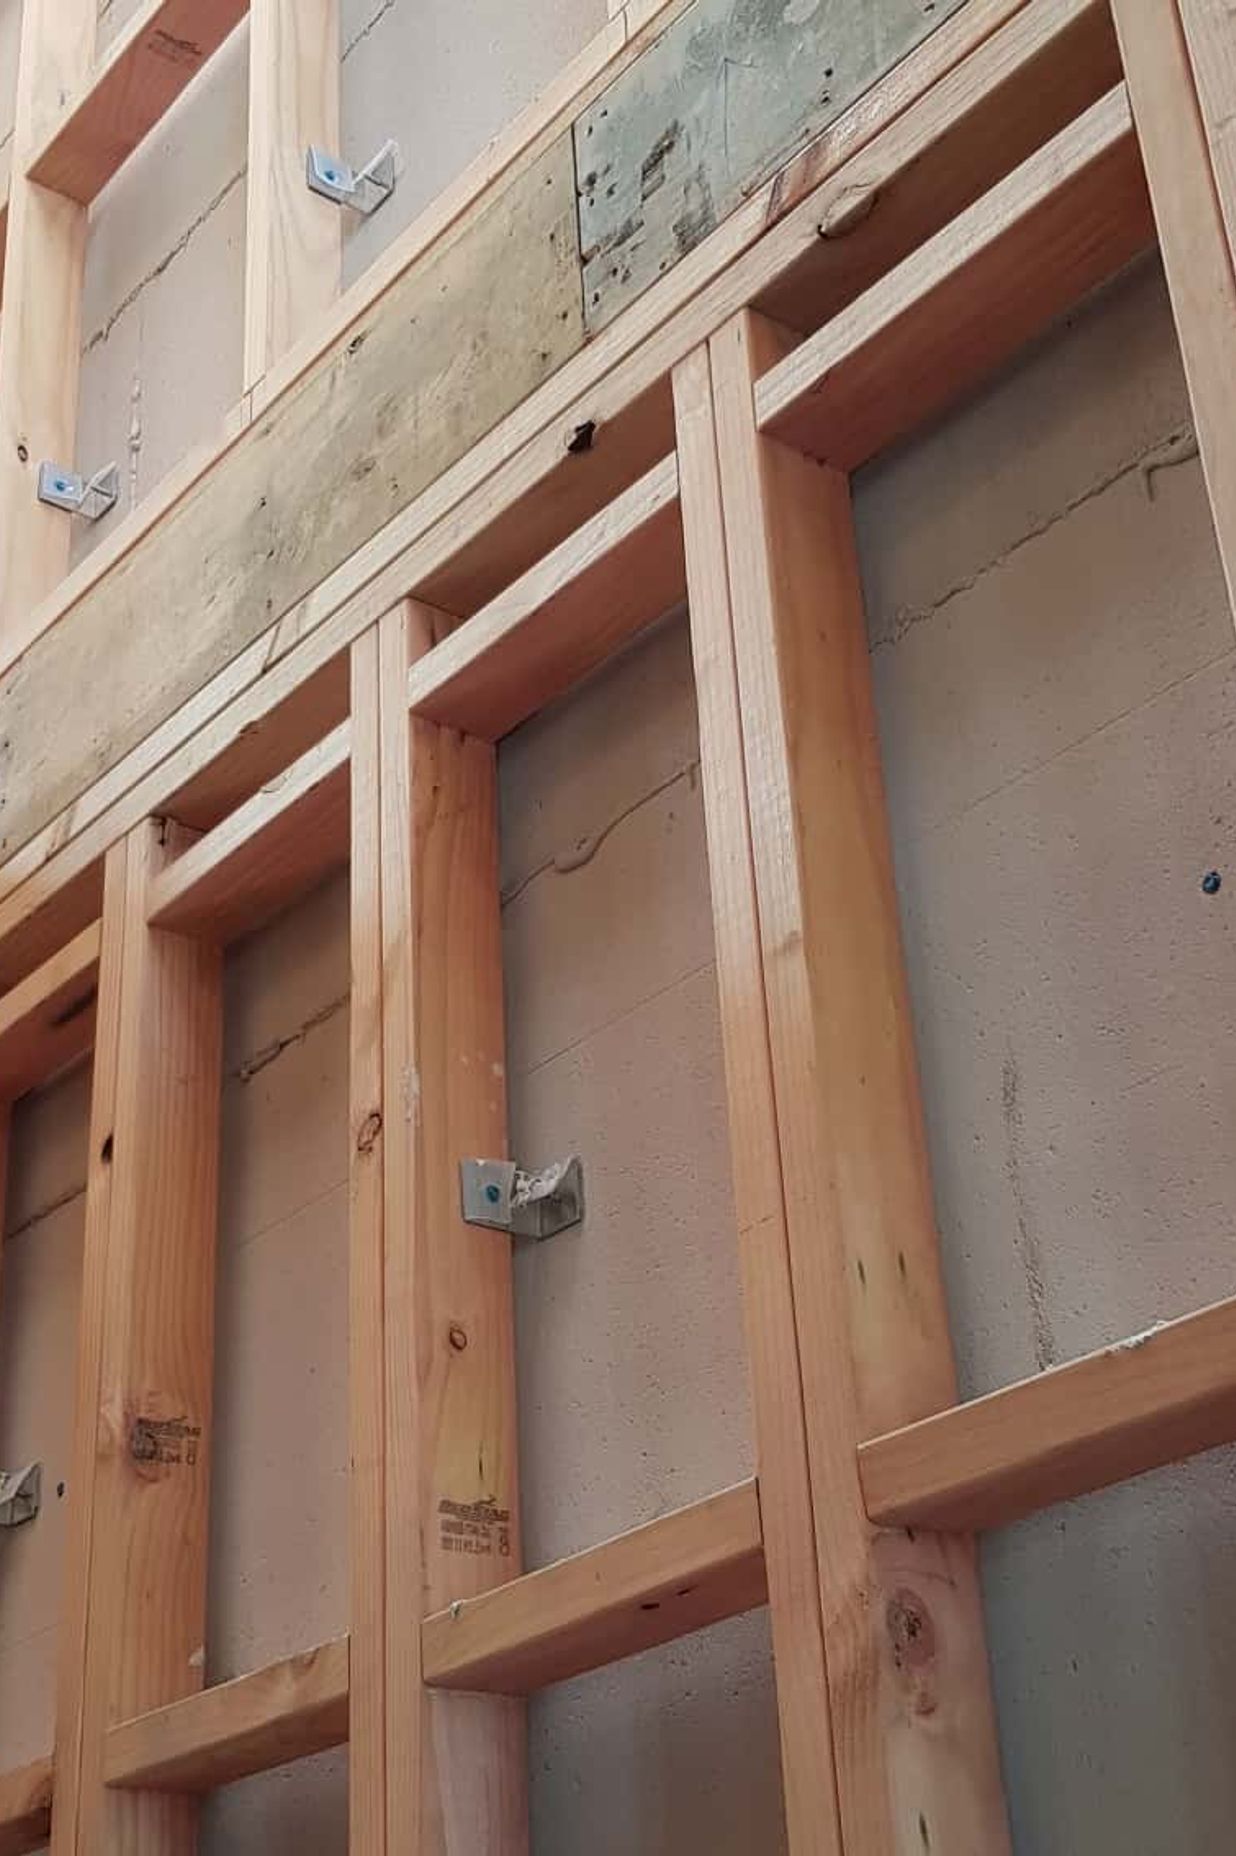 The INTEGRA Central Barrier Intertenancy Wall system can be installed with either timber or steel framing and there are specifications for various plasterboard linings depending on the required acoustic rating.